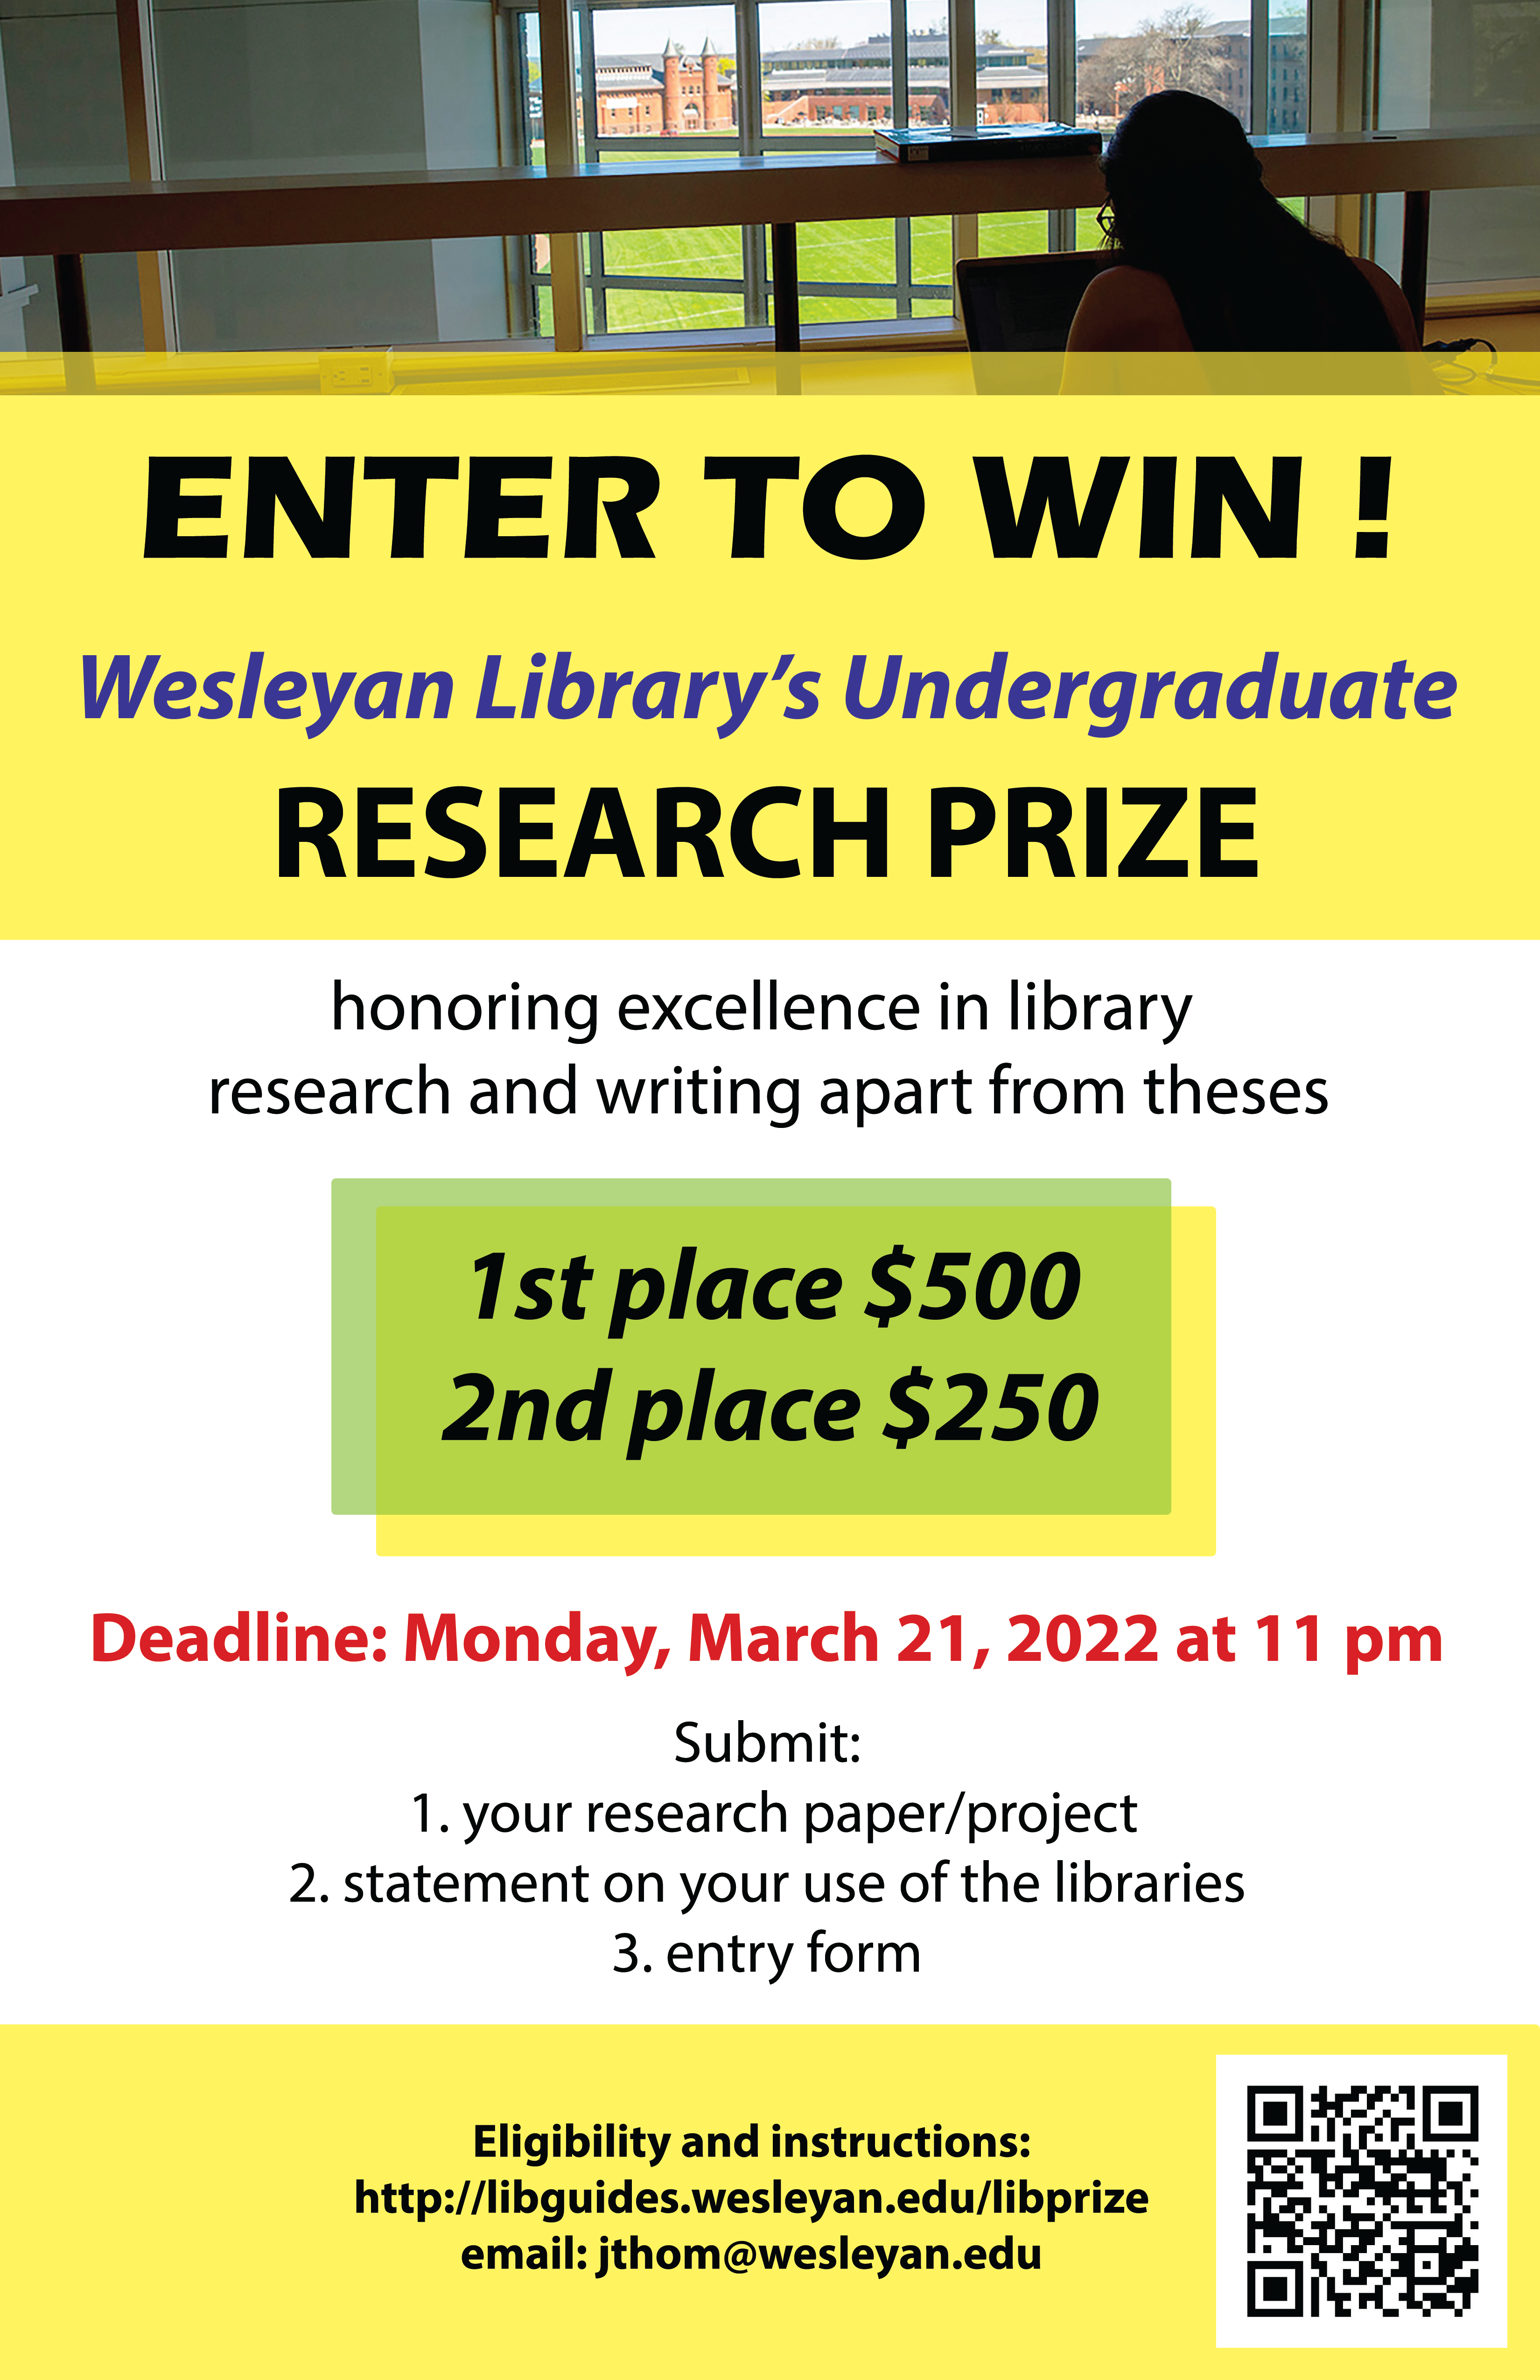 Wesleyan Library Undergraduate Research Prize. Eligibility and instruction http://libguides.wesleyan.edu/libprize For more information write to jthom@wesleyan.edu